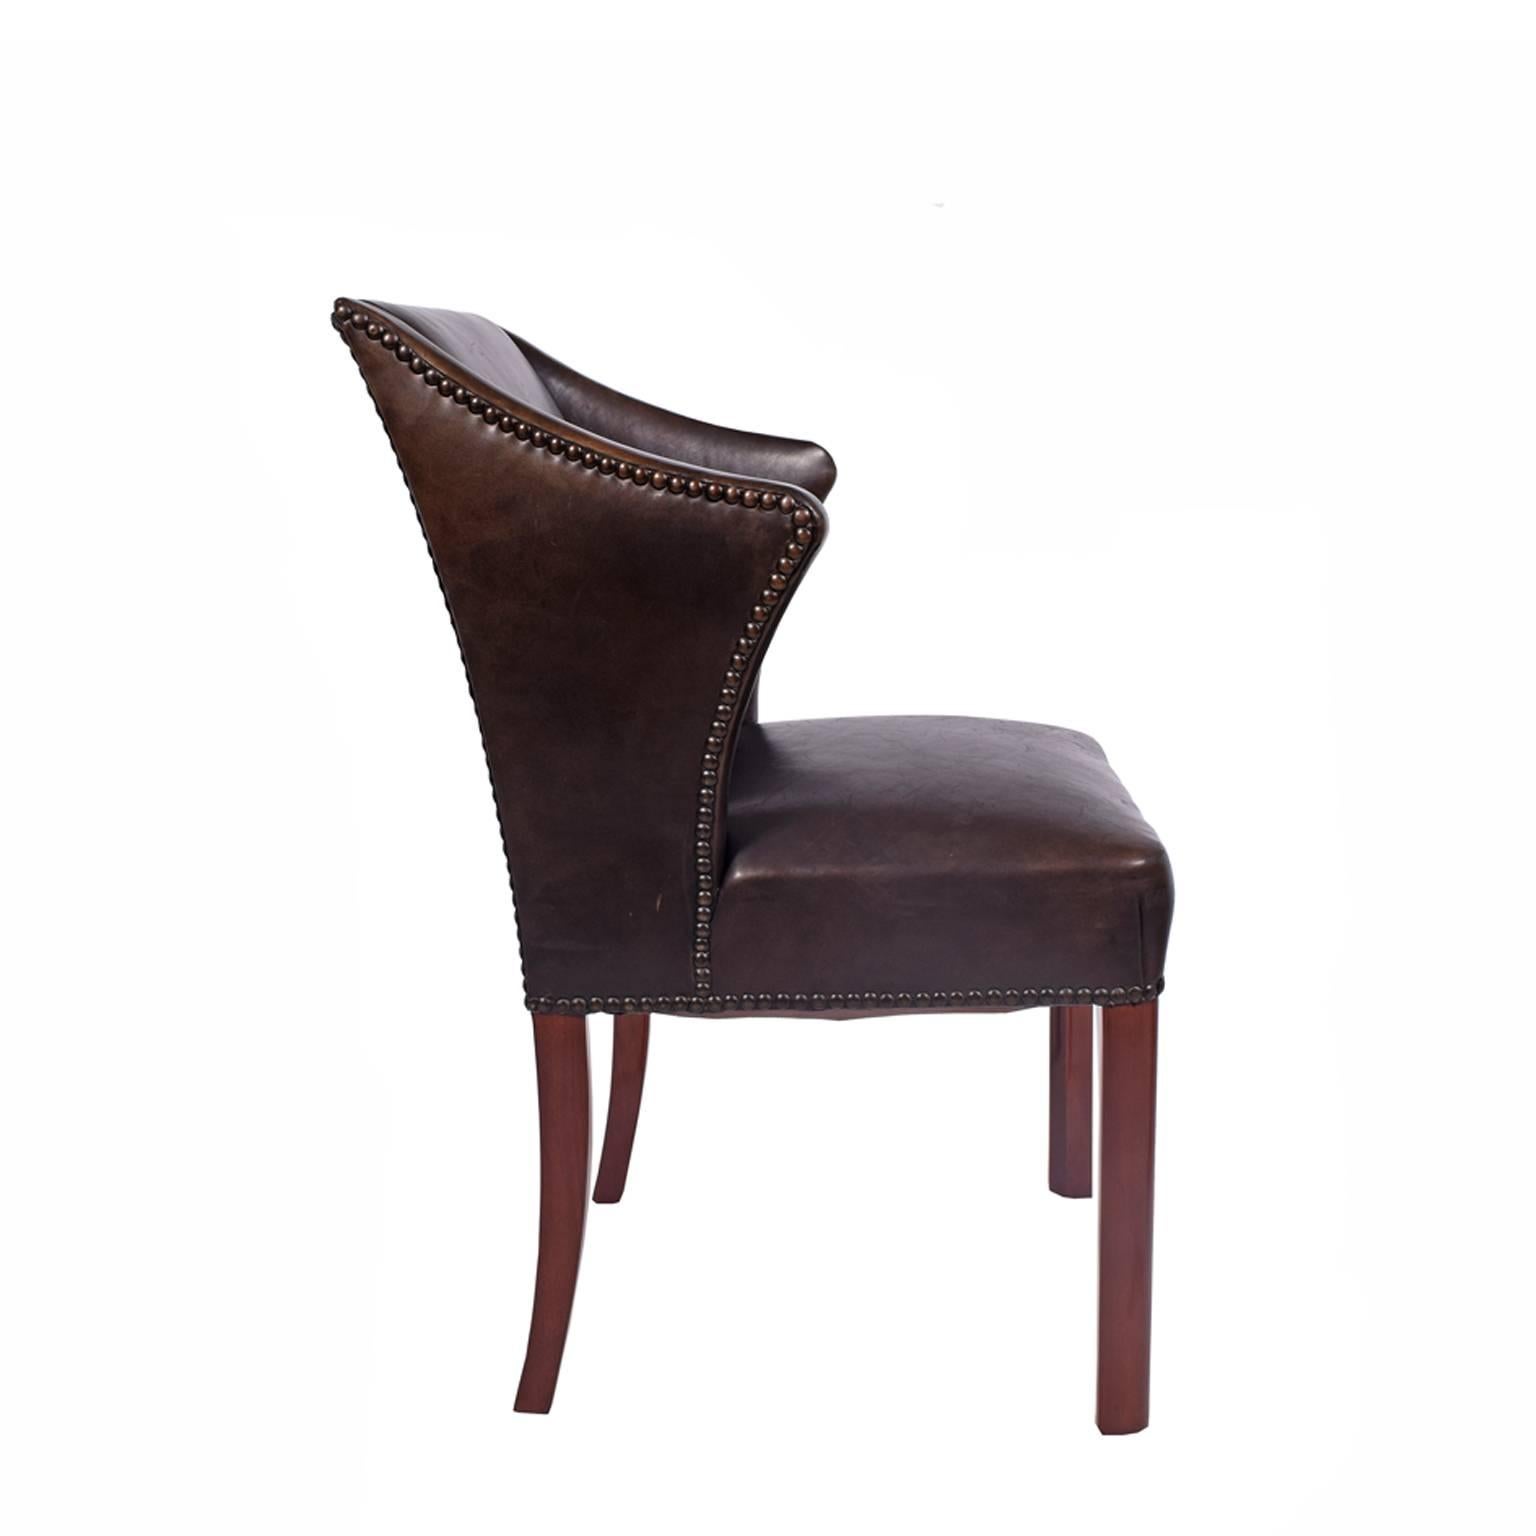 Armchair features black leather, spring seat and mahogany stained beechwood legs. Great looking piece in the style of Frits Henningsen and Fritz Hansen from the 1940s.